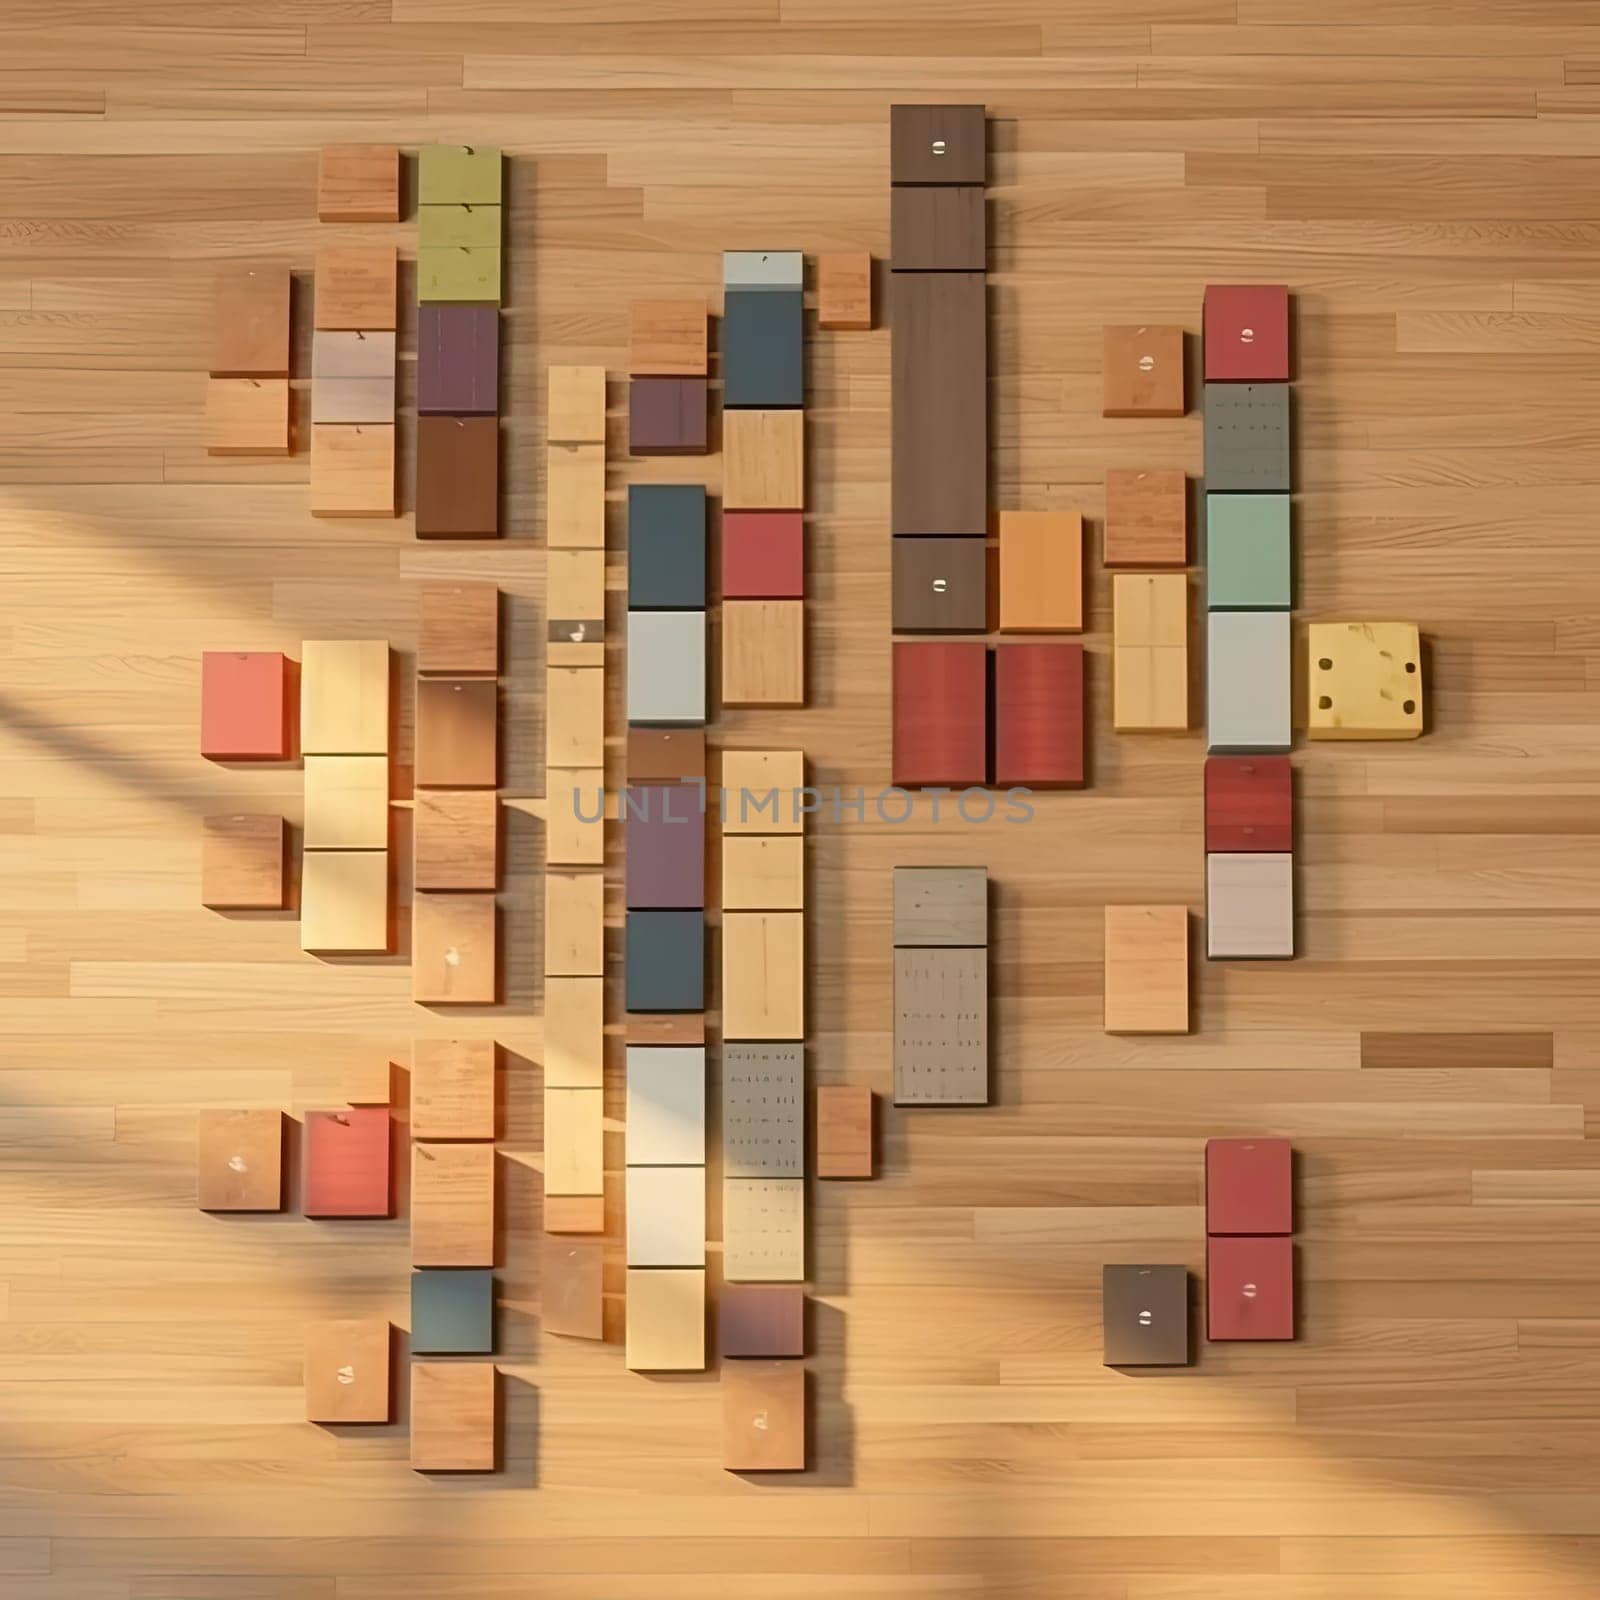 Top view of wooden toy blocks arranged in a row on wooden floor by eduardobellotto